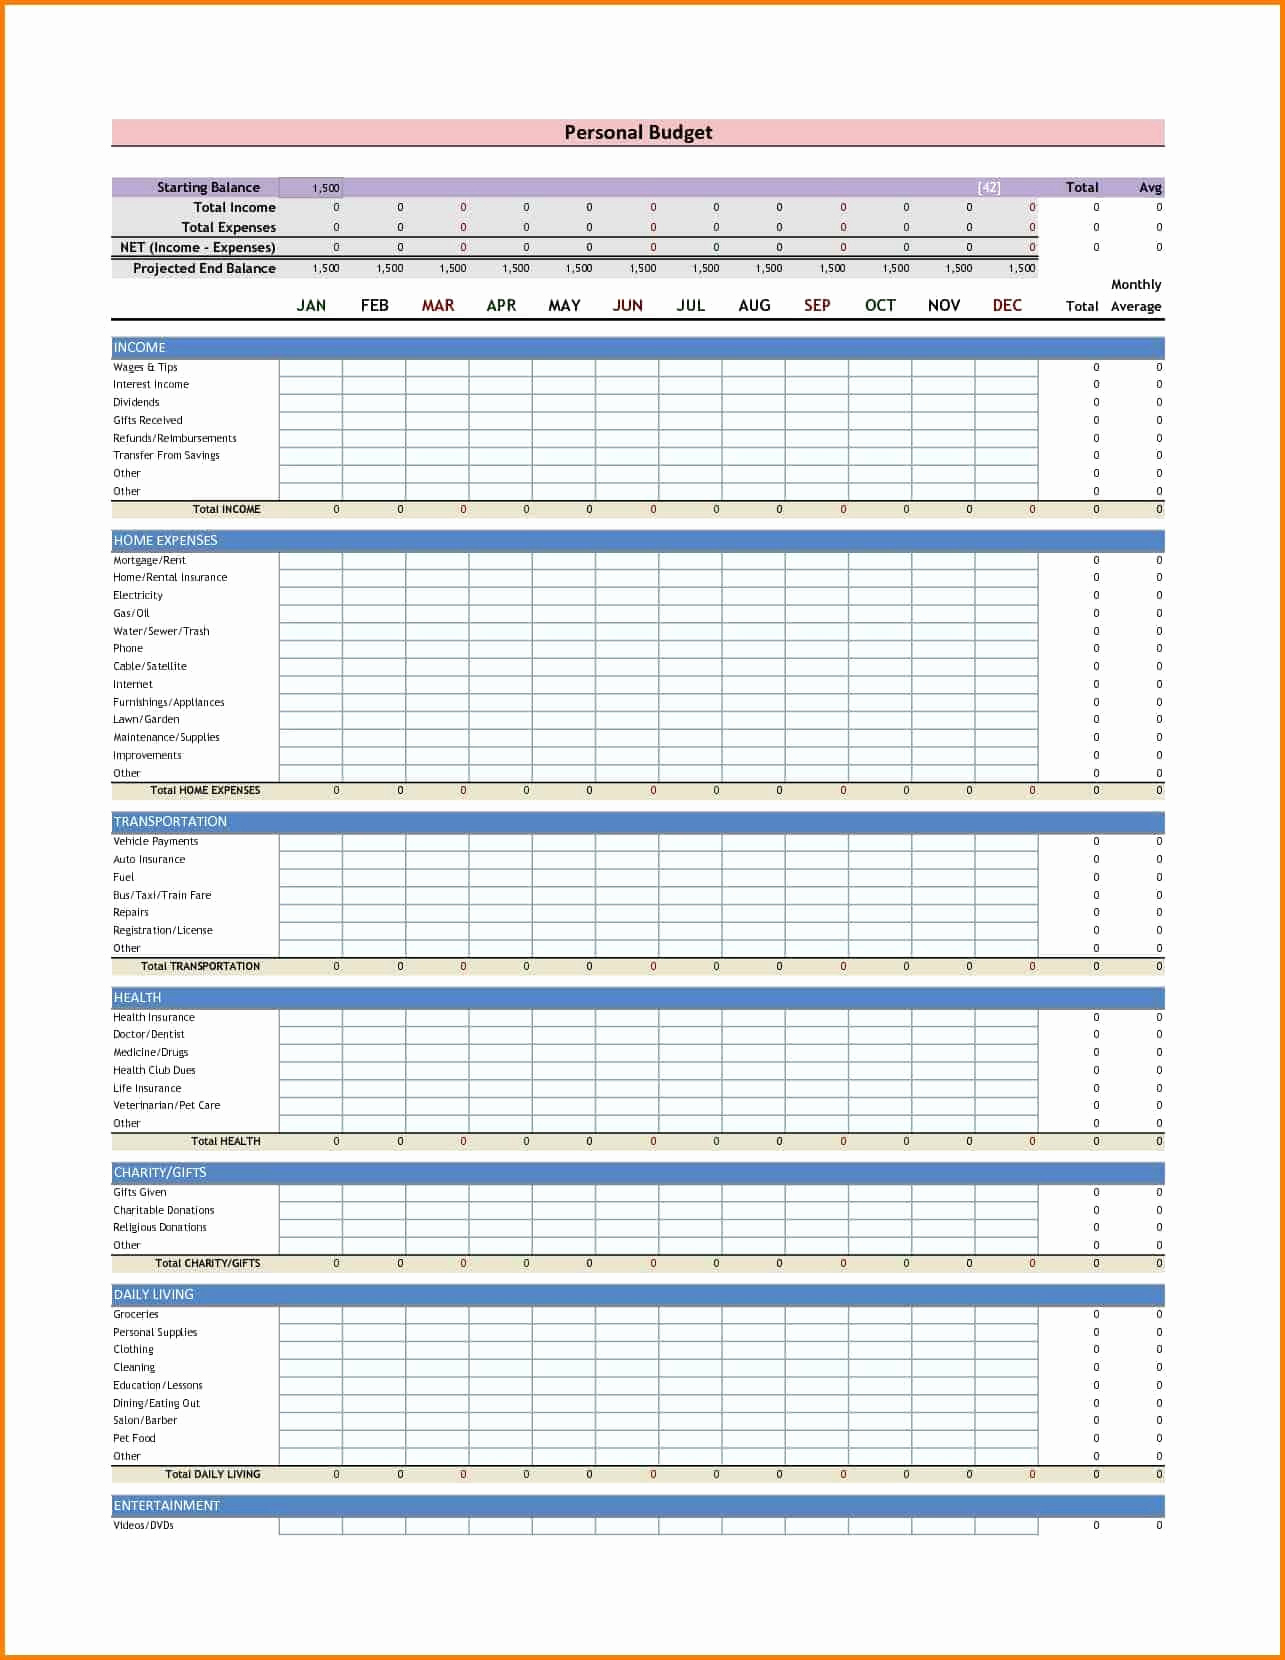 Physical Stock Excel Sheet Sample Physical Inventory Count Sheet